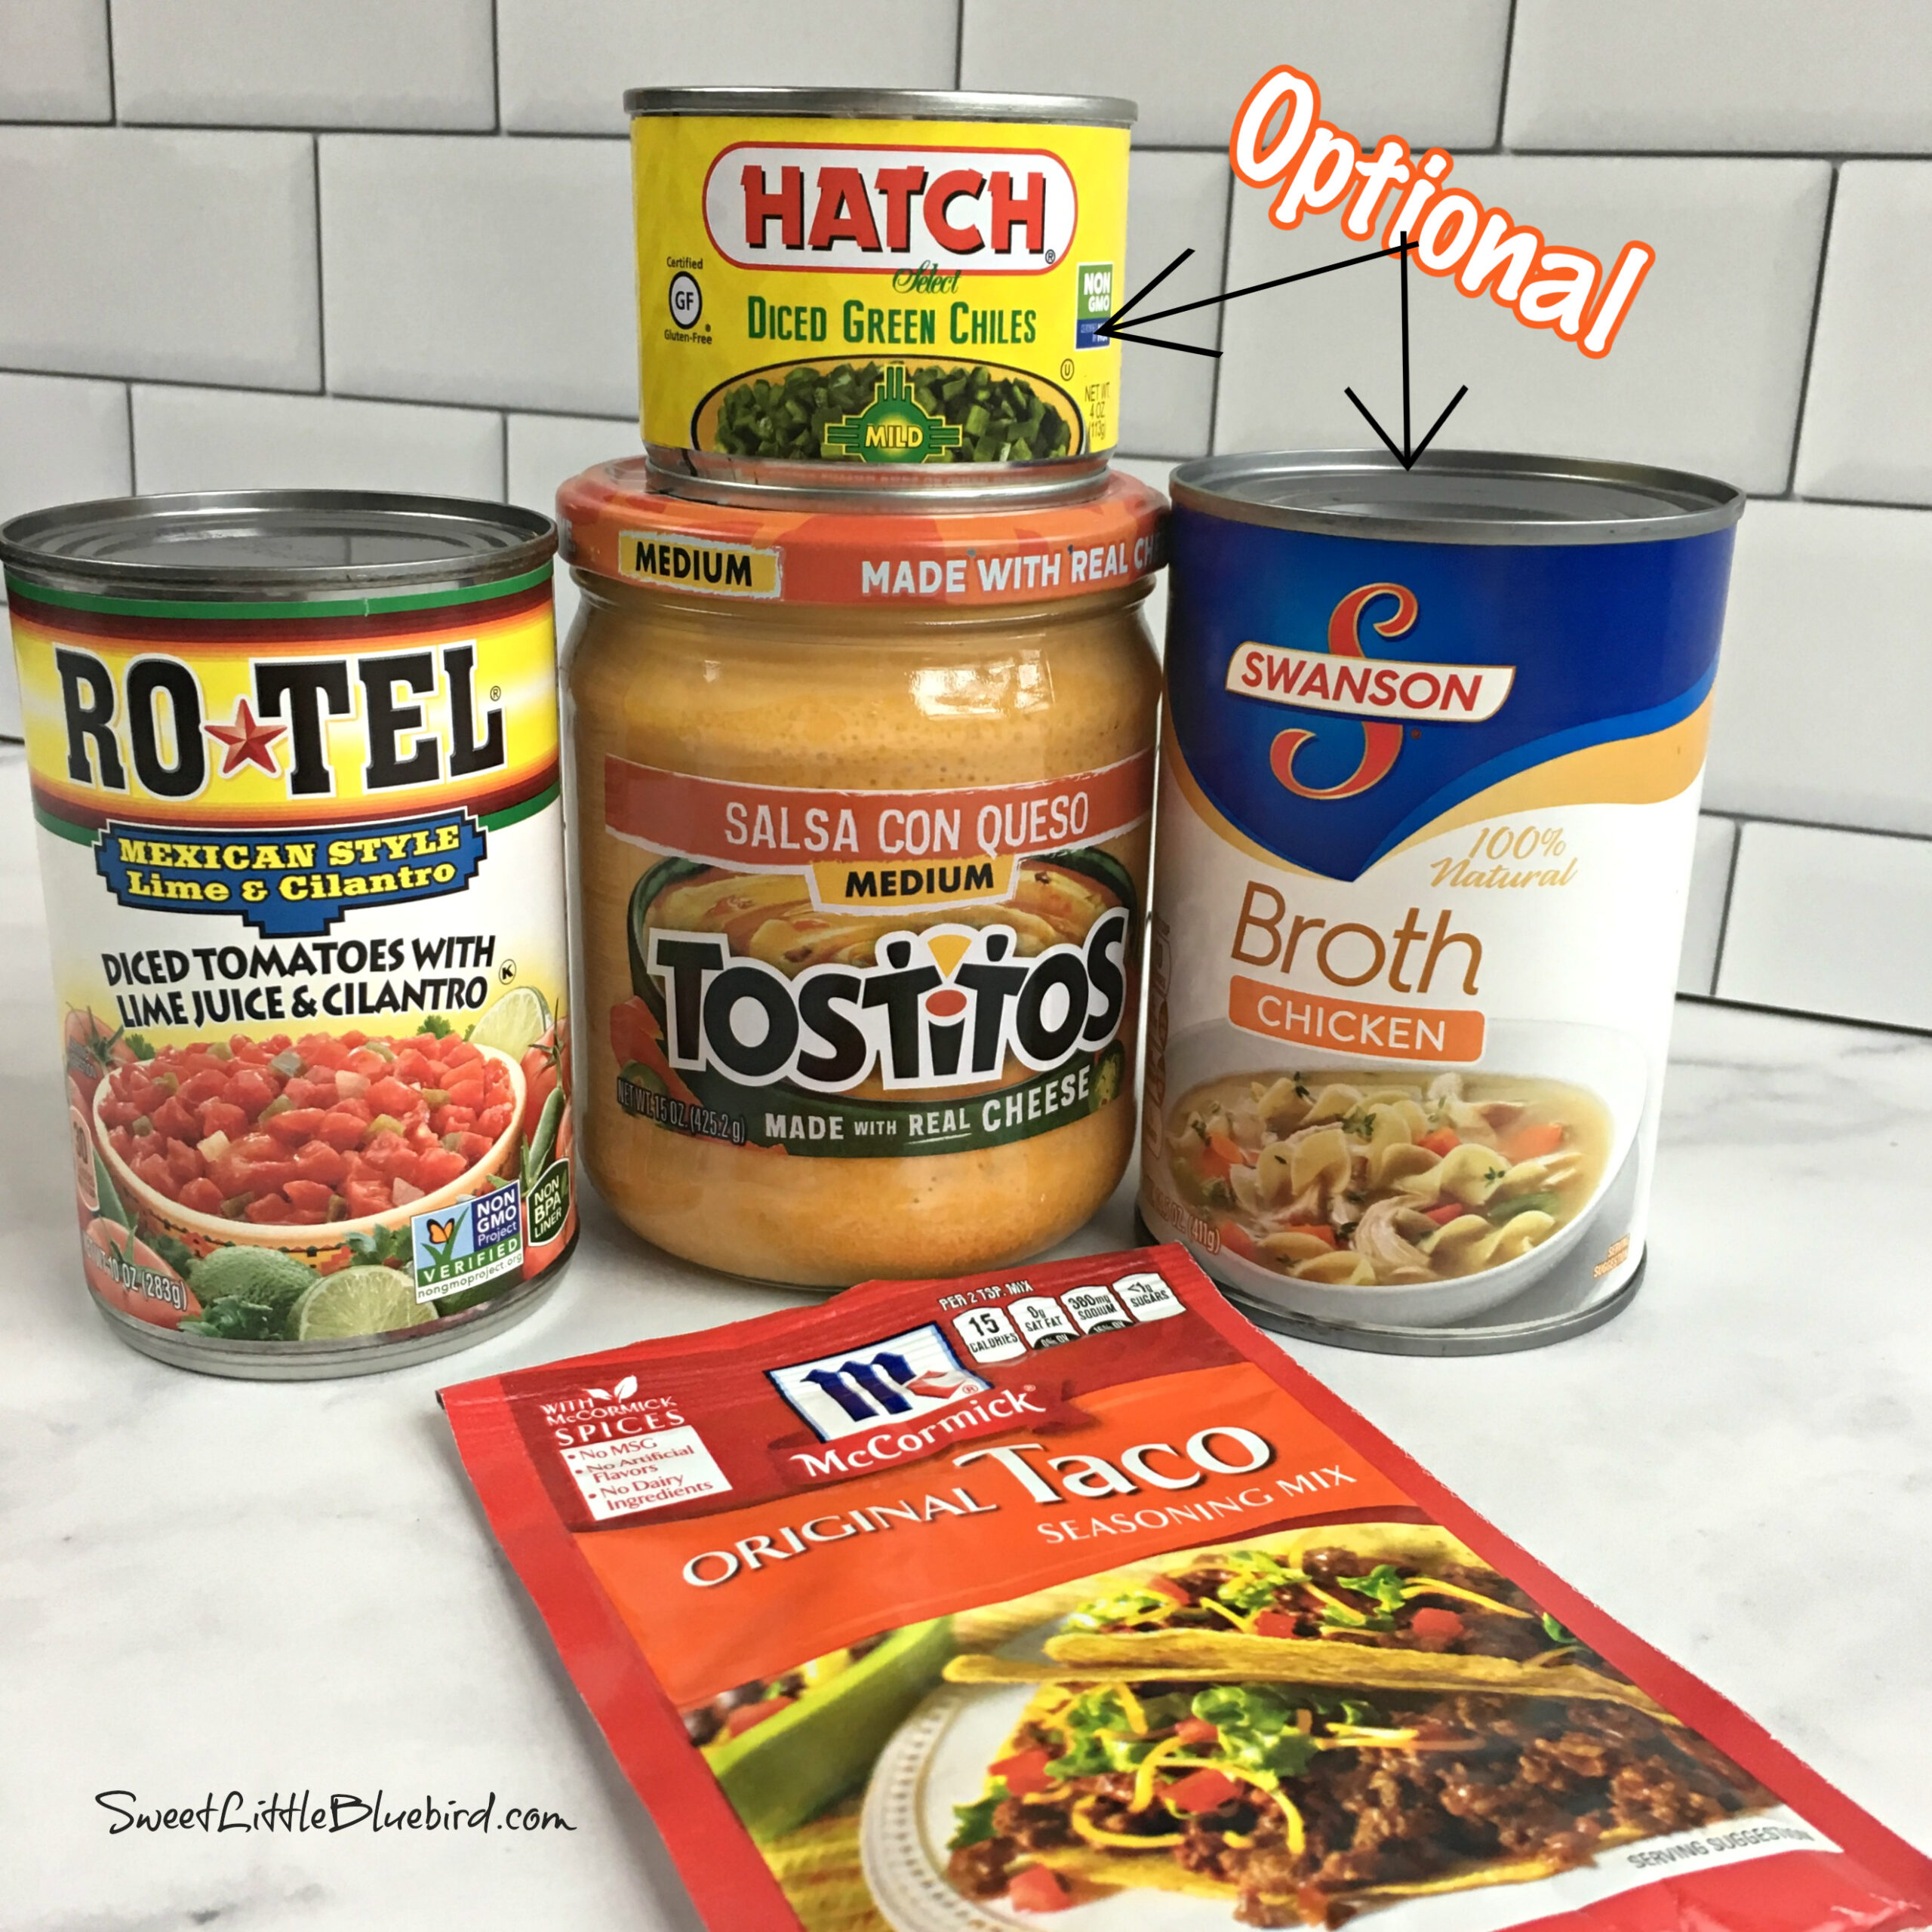 This is a showing the original recipe ingredients. The photo shows a packet of taco seasoning, a jar of queso, a can of Rotel and a can of diced green chiles and a can of chicken broth. 